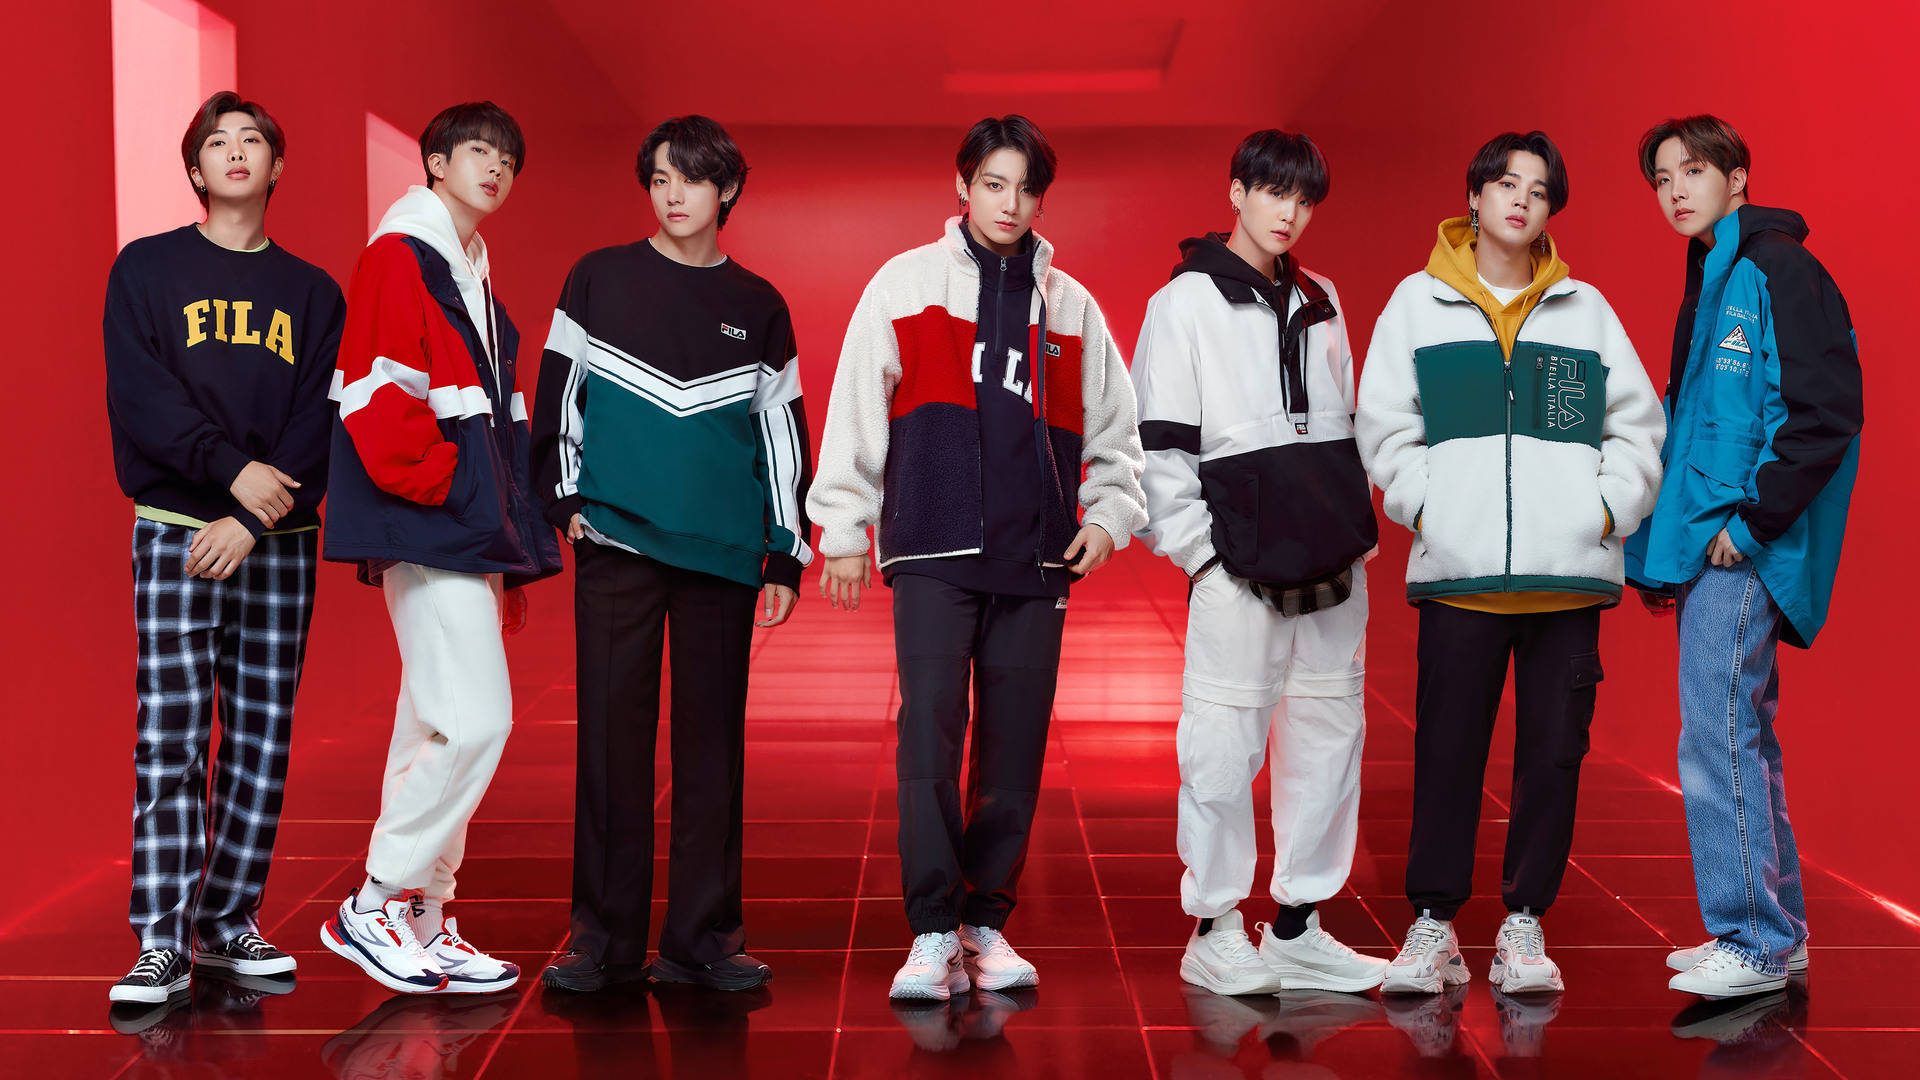 Bts Group Photo For Fila